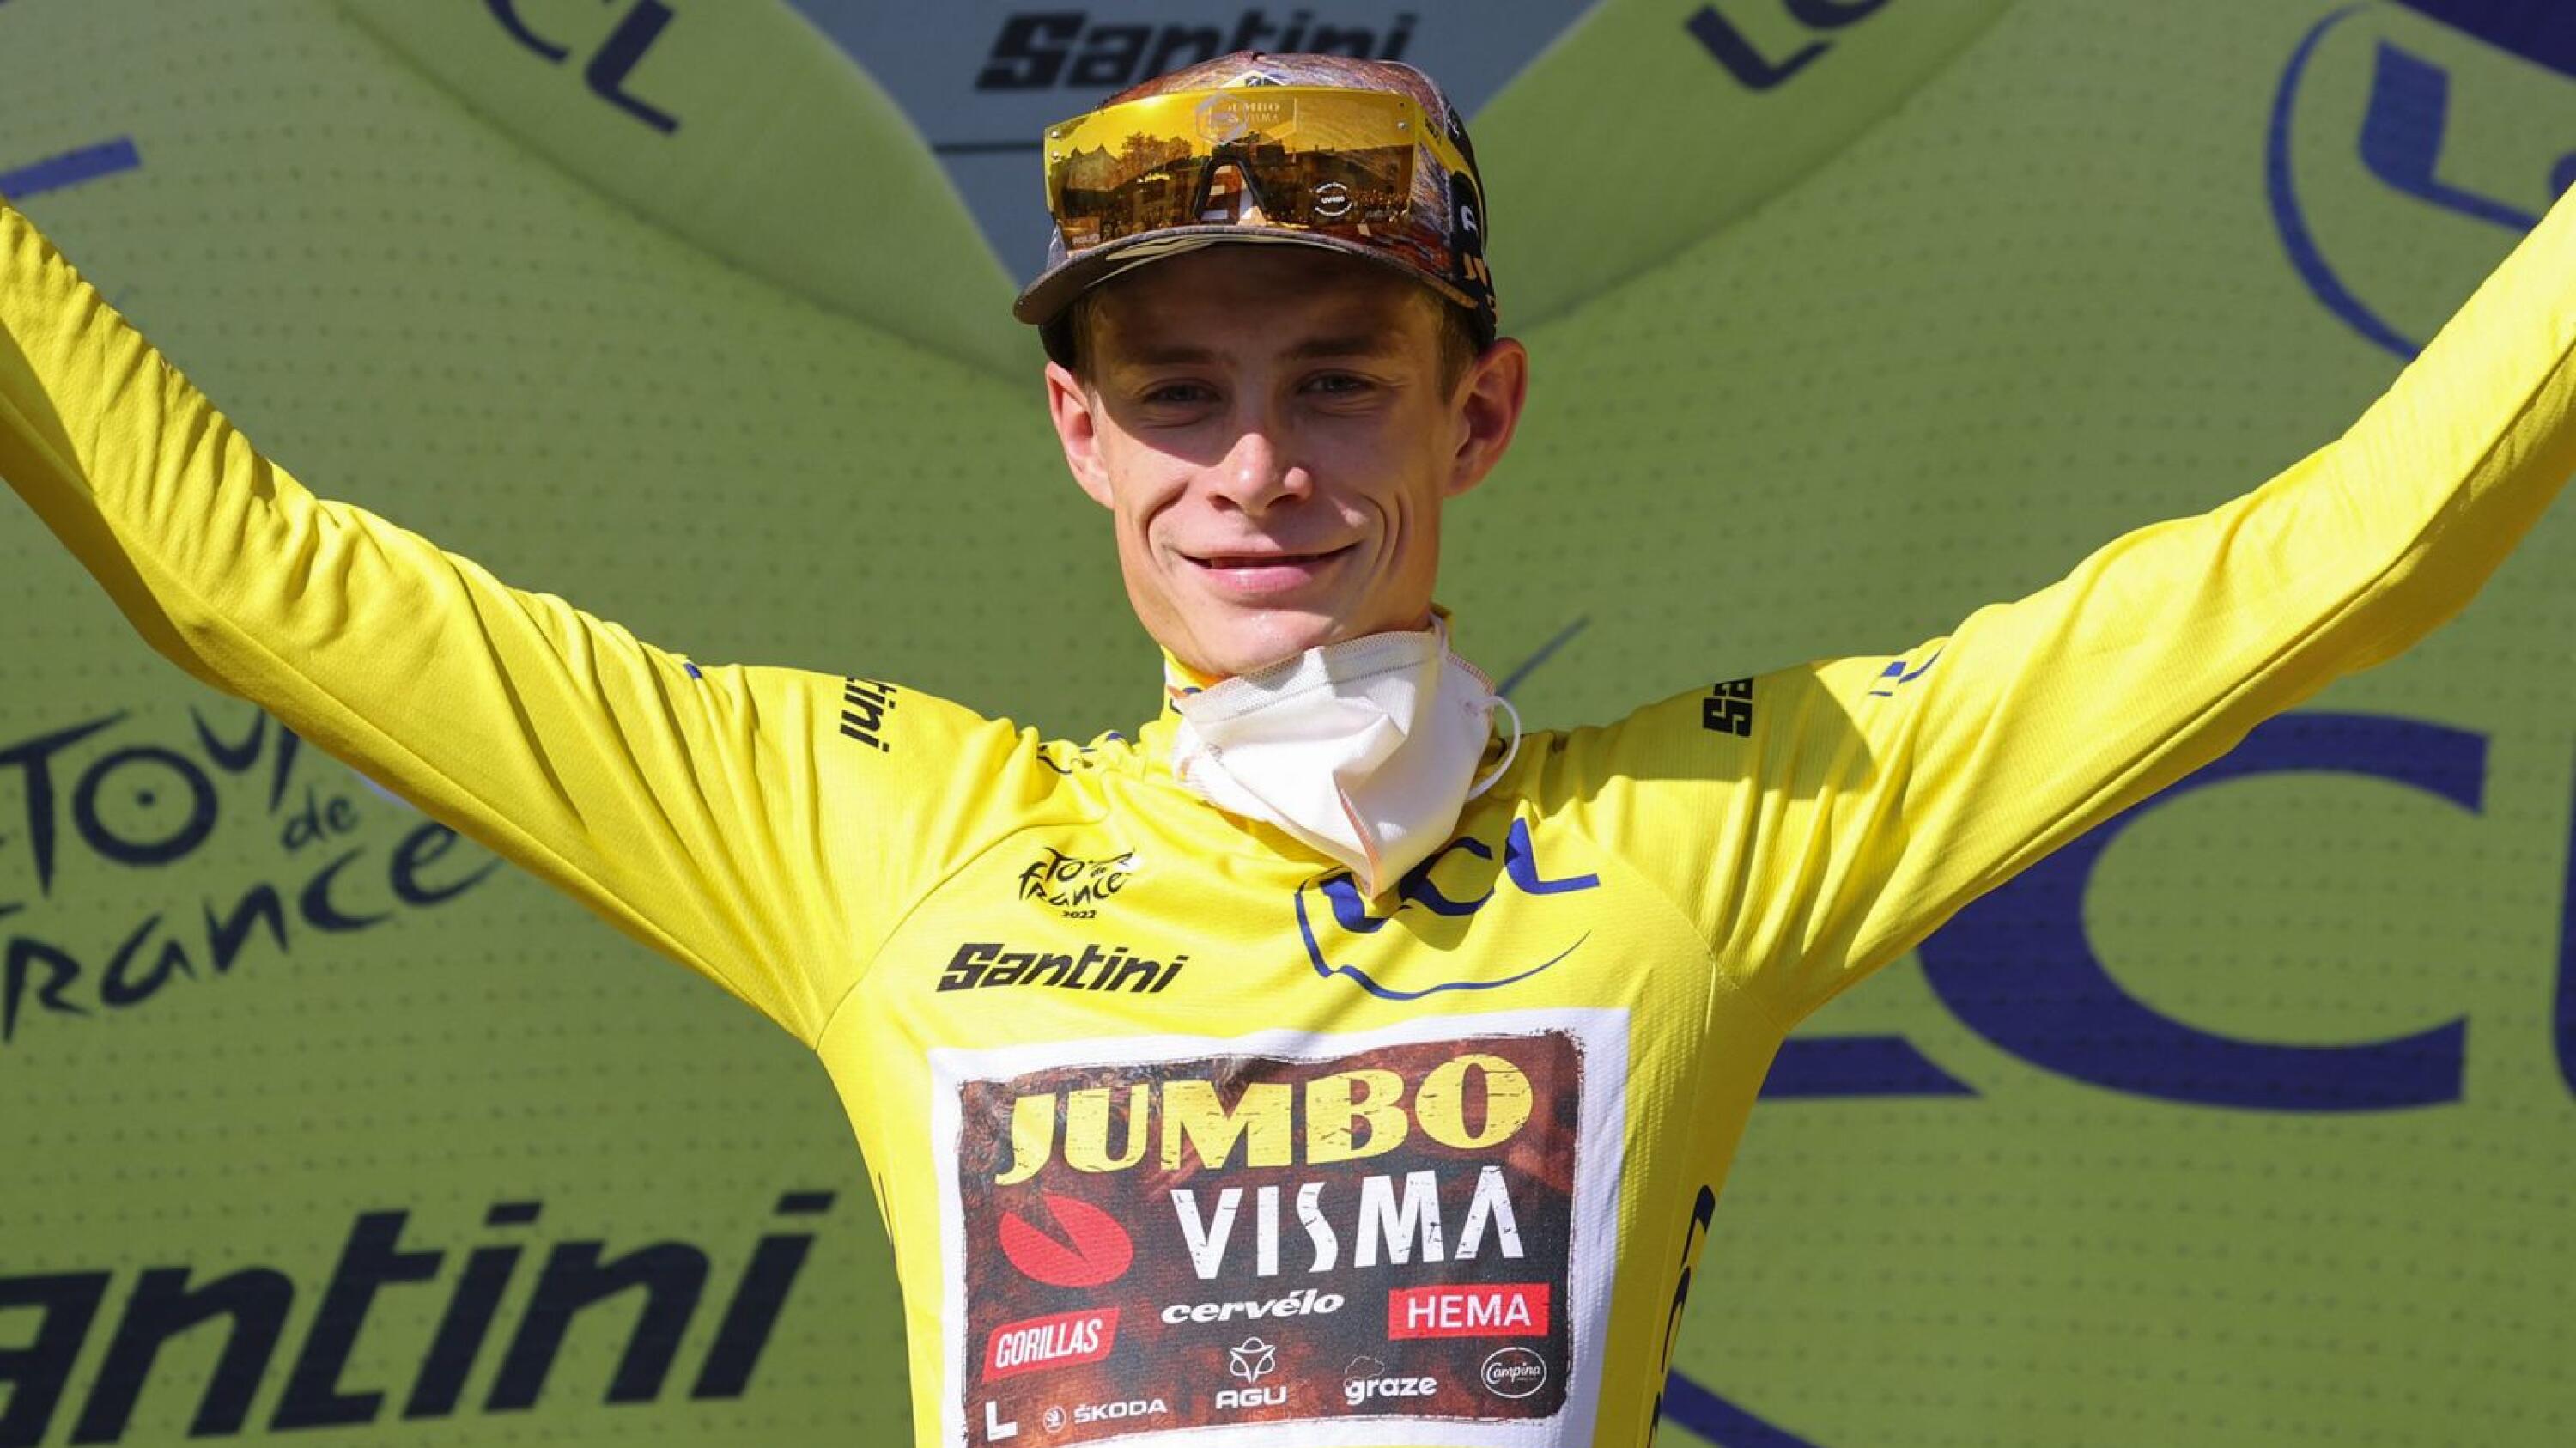 Jumbo-Visma team's Danish rider Jonas Vingegaard celebrates on the podium with the overall leader's yellow jersey after the 15th stage of the 109th edition of the Tour de France cycling race, 202,5 km between Rodez and Carcassonne in sourthern France, on Sunday